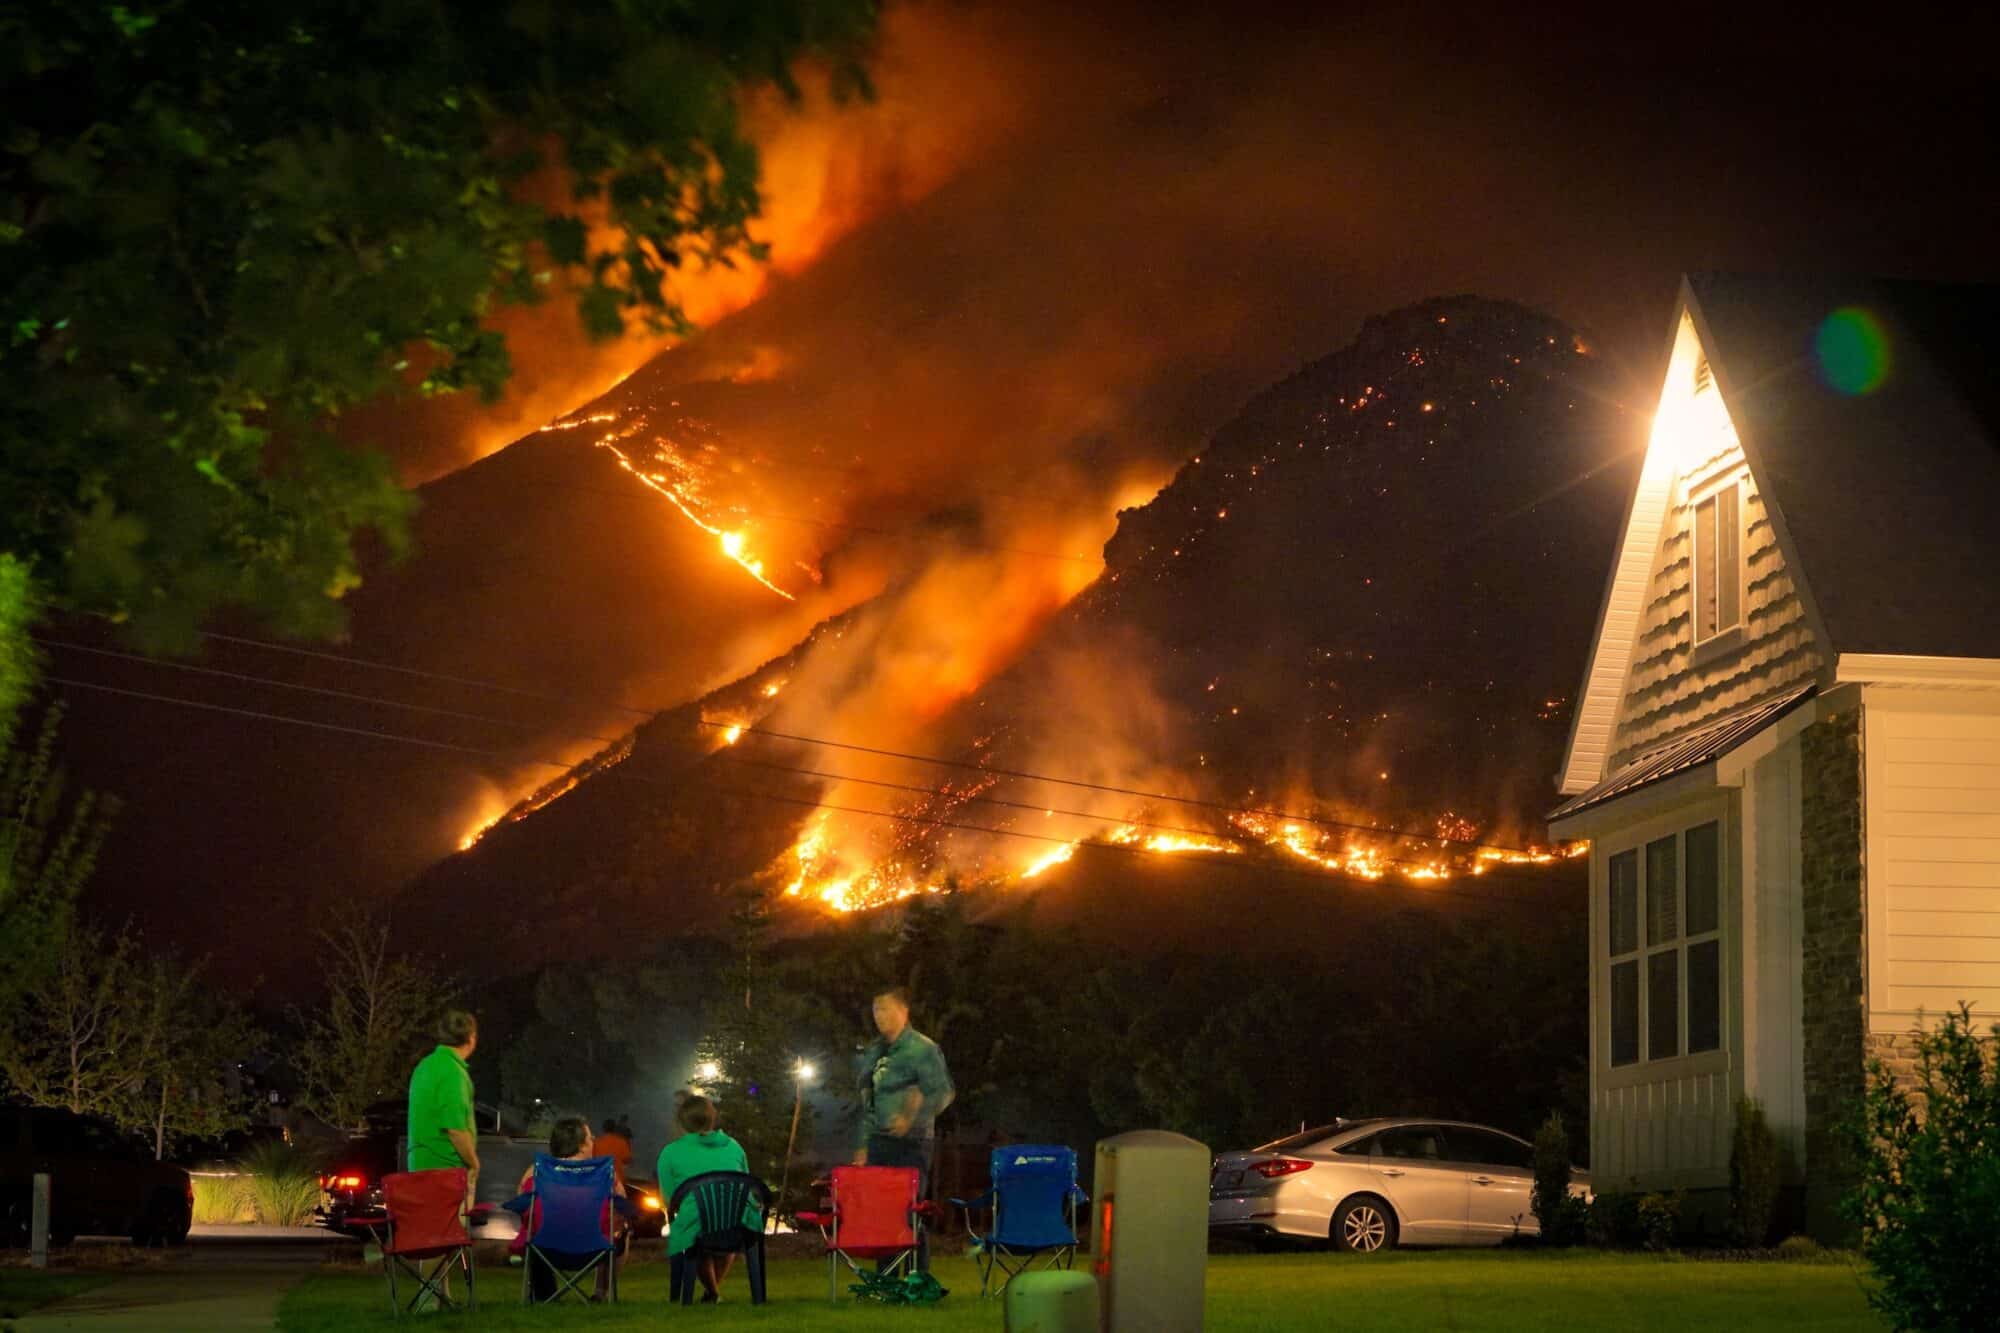 A family looks on from their driveway on lawnchairs as a wildfire approaches their home.